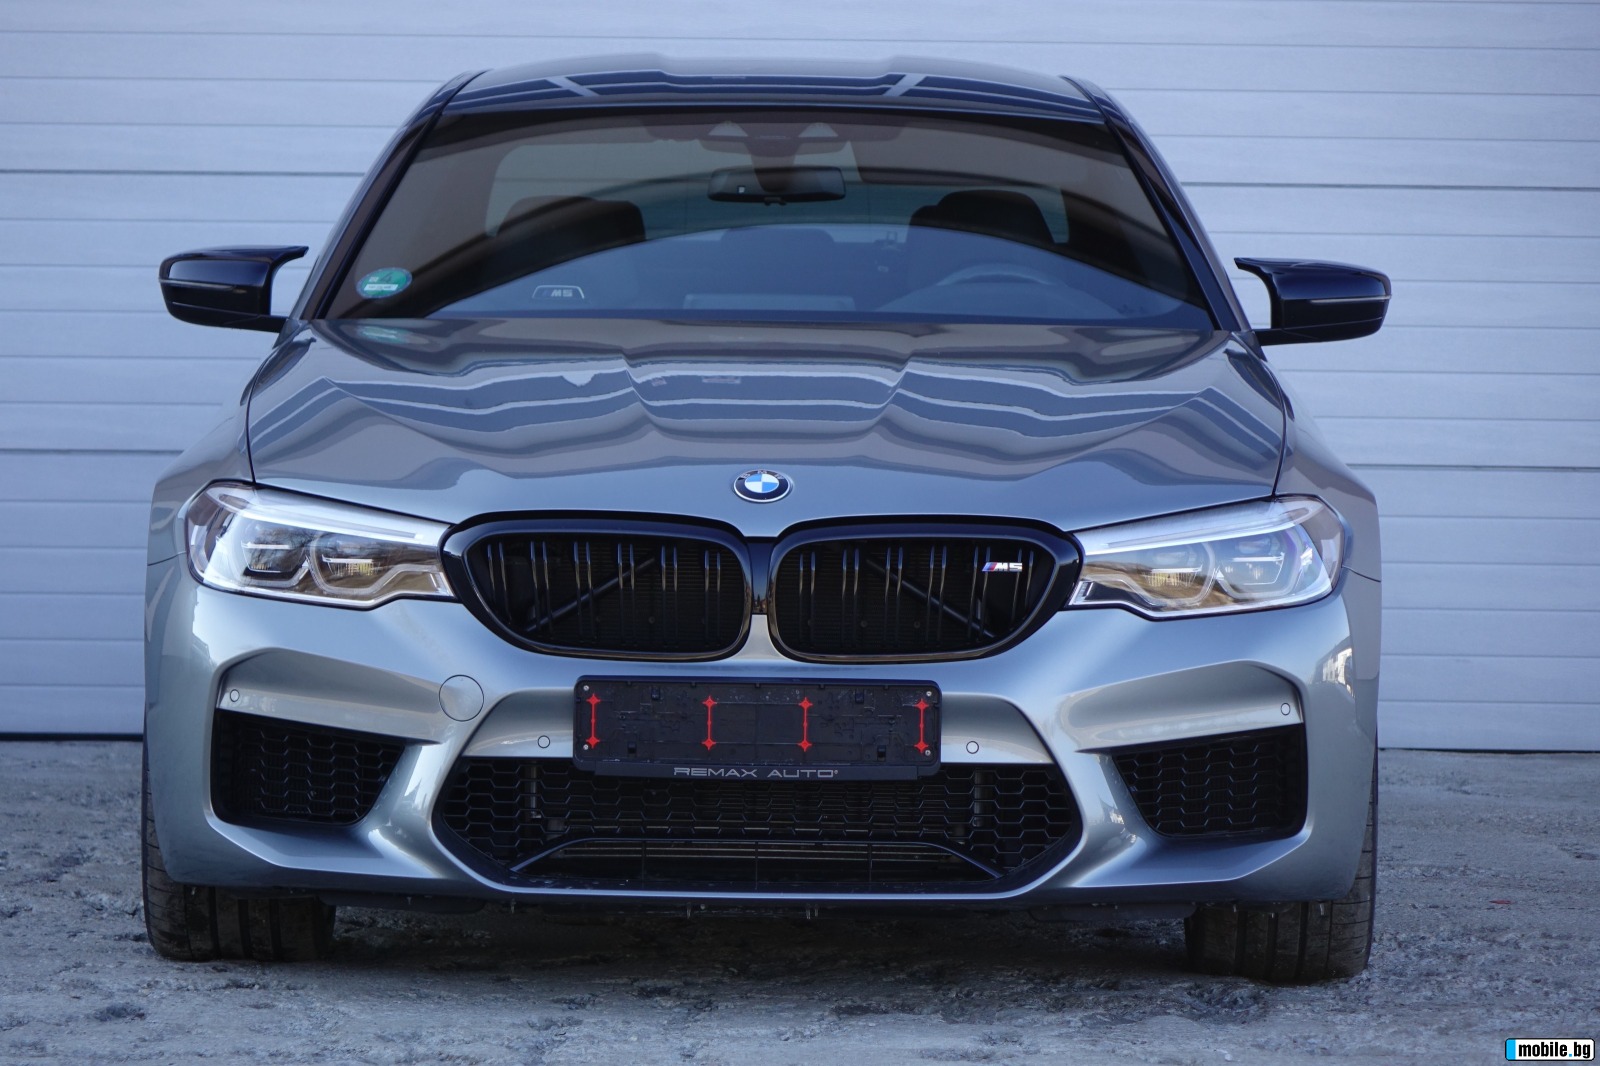 BMW M5 XDRIVE*COMPETITION*CARBON*LED* | Mobile.bg   2